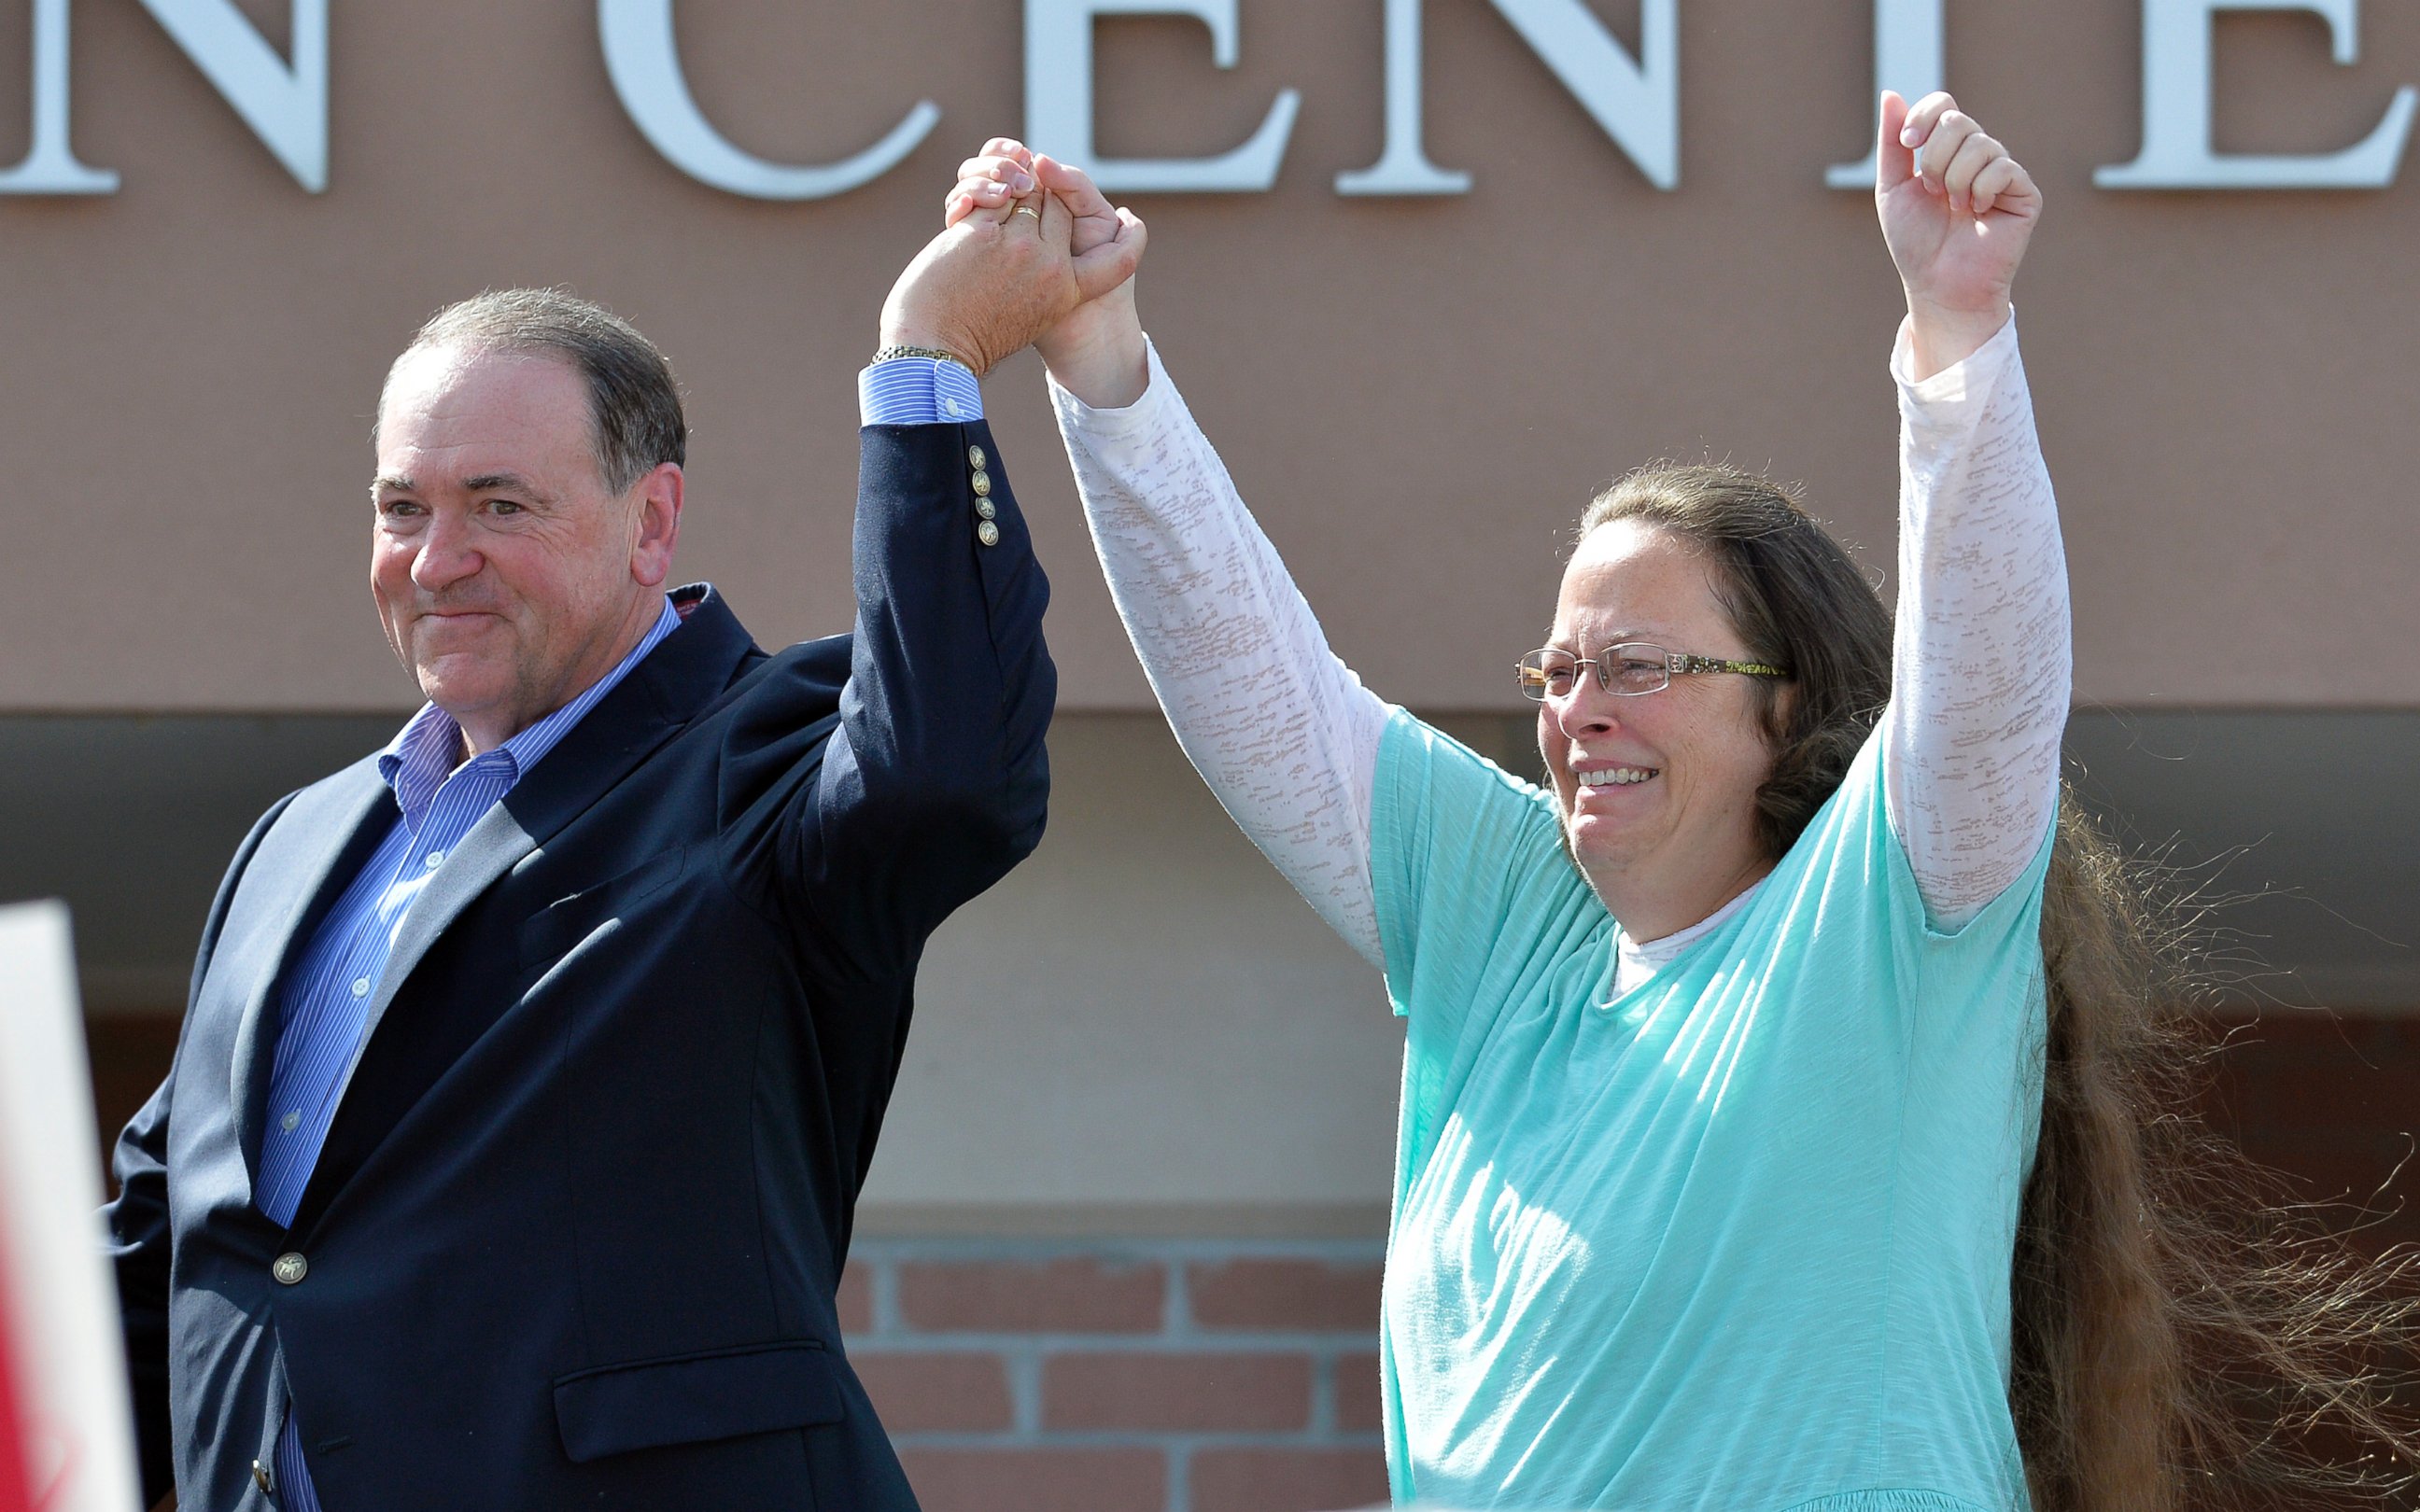 PHOTO: Rowan County Clerk Kim Davis, with Republican presidential candidate Mike Huckabee, left, at her side, greets the crowd after being released from the Carter County Detention Center, Sept. 8, 2015, in Grayson, Ky.